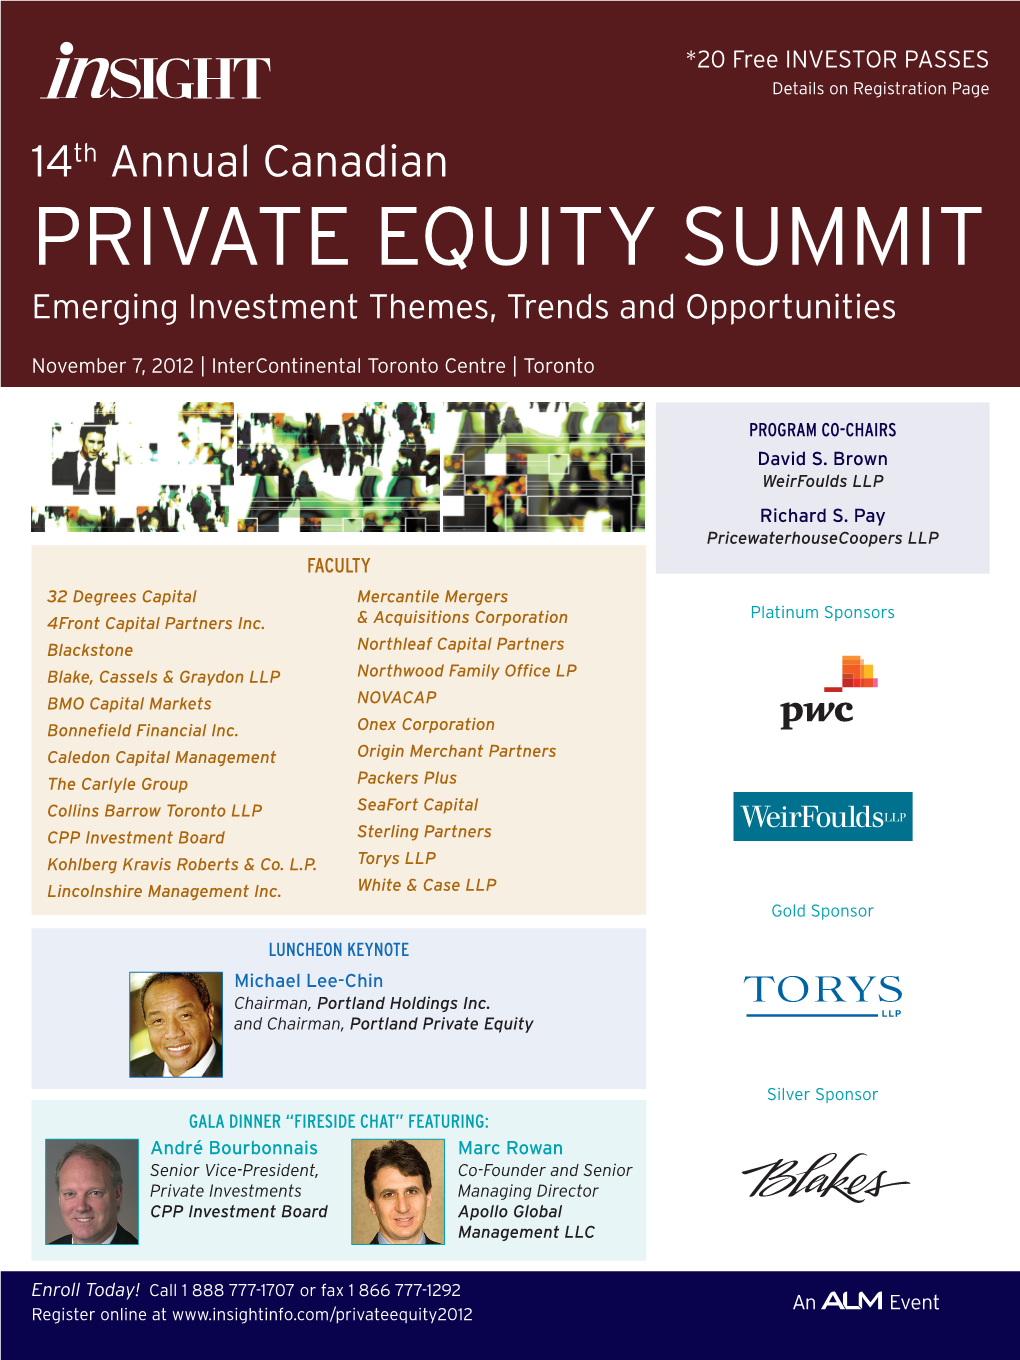 PRIVATE EQUITY Summit Emerging Investment Themes, Trends and Opportunities